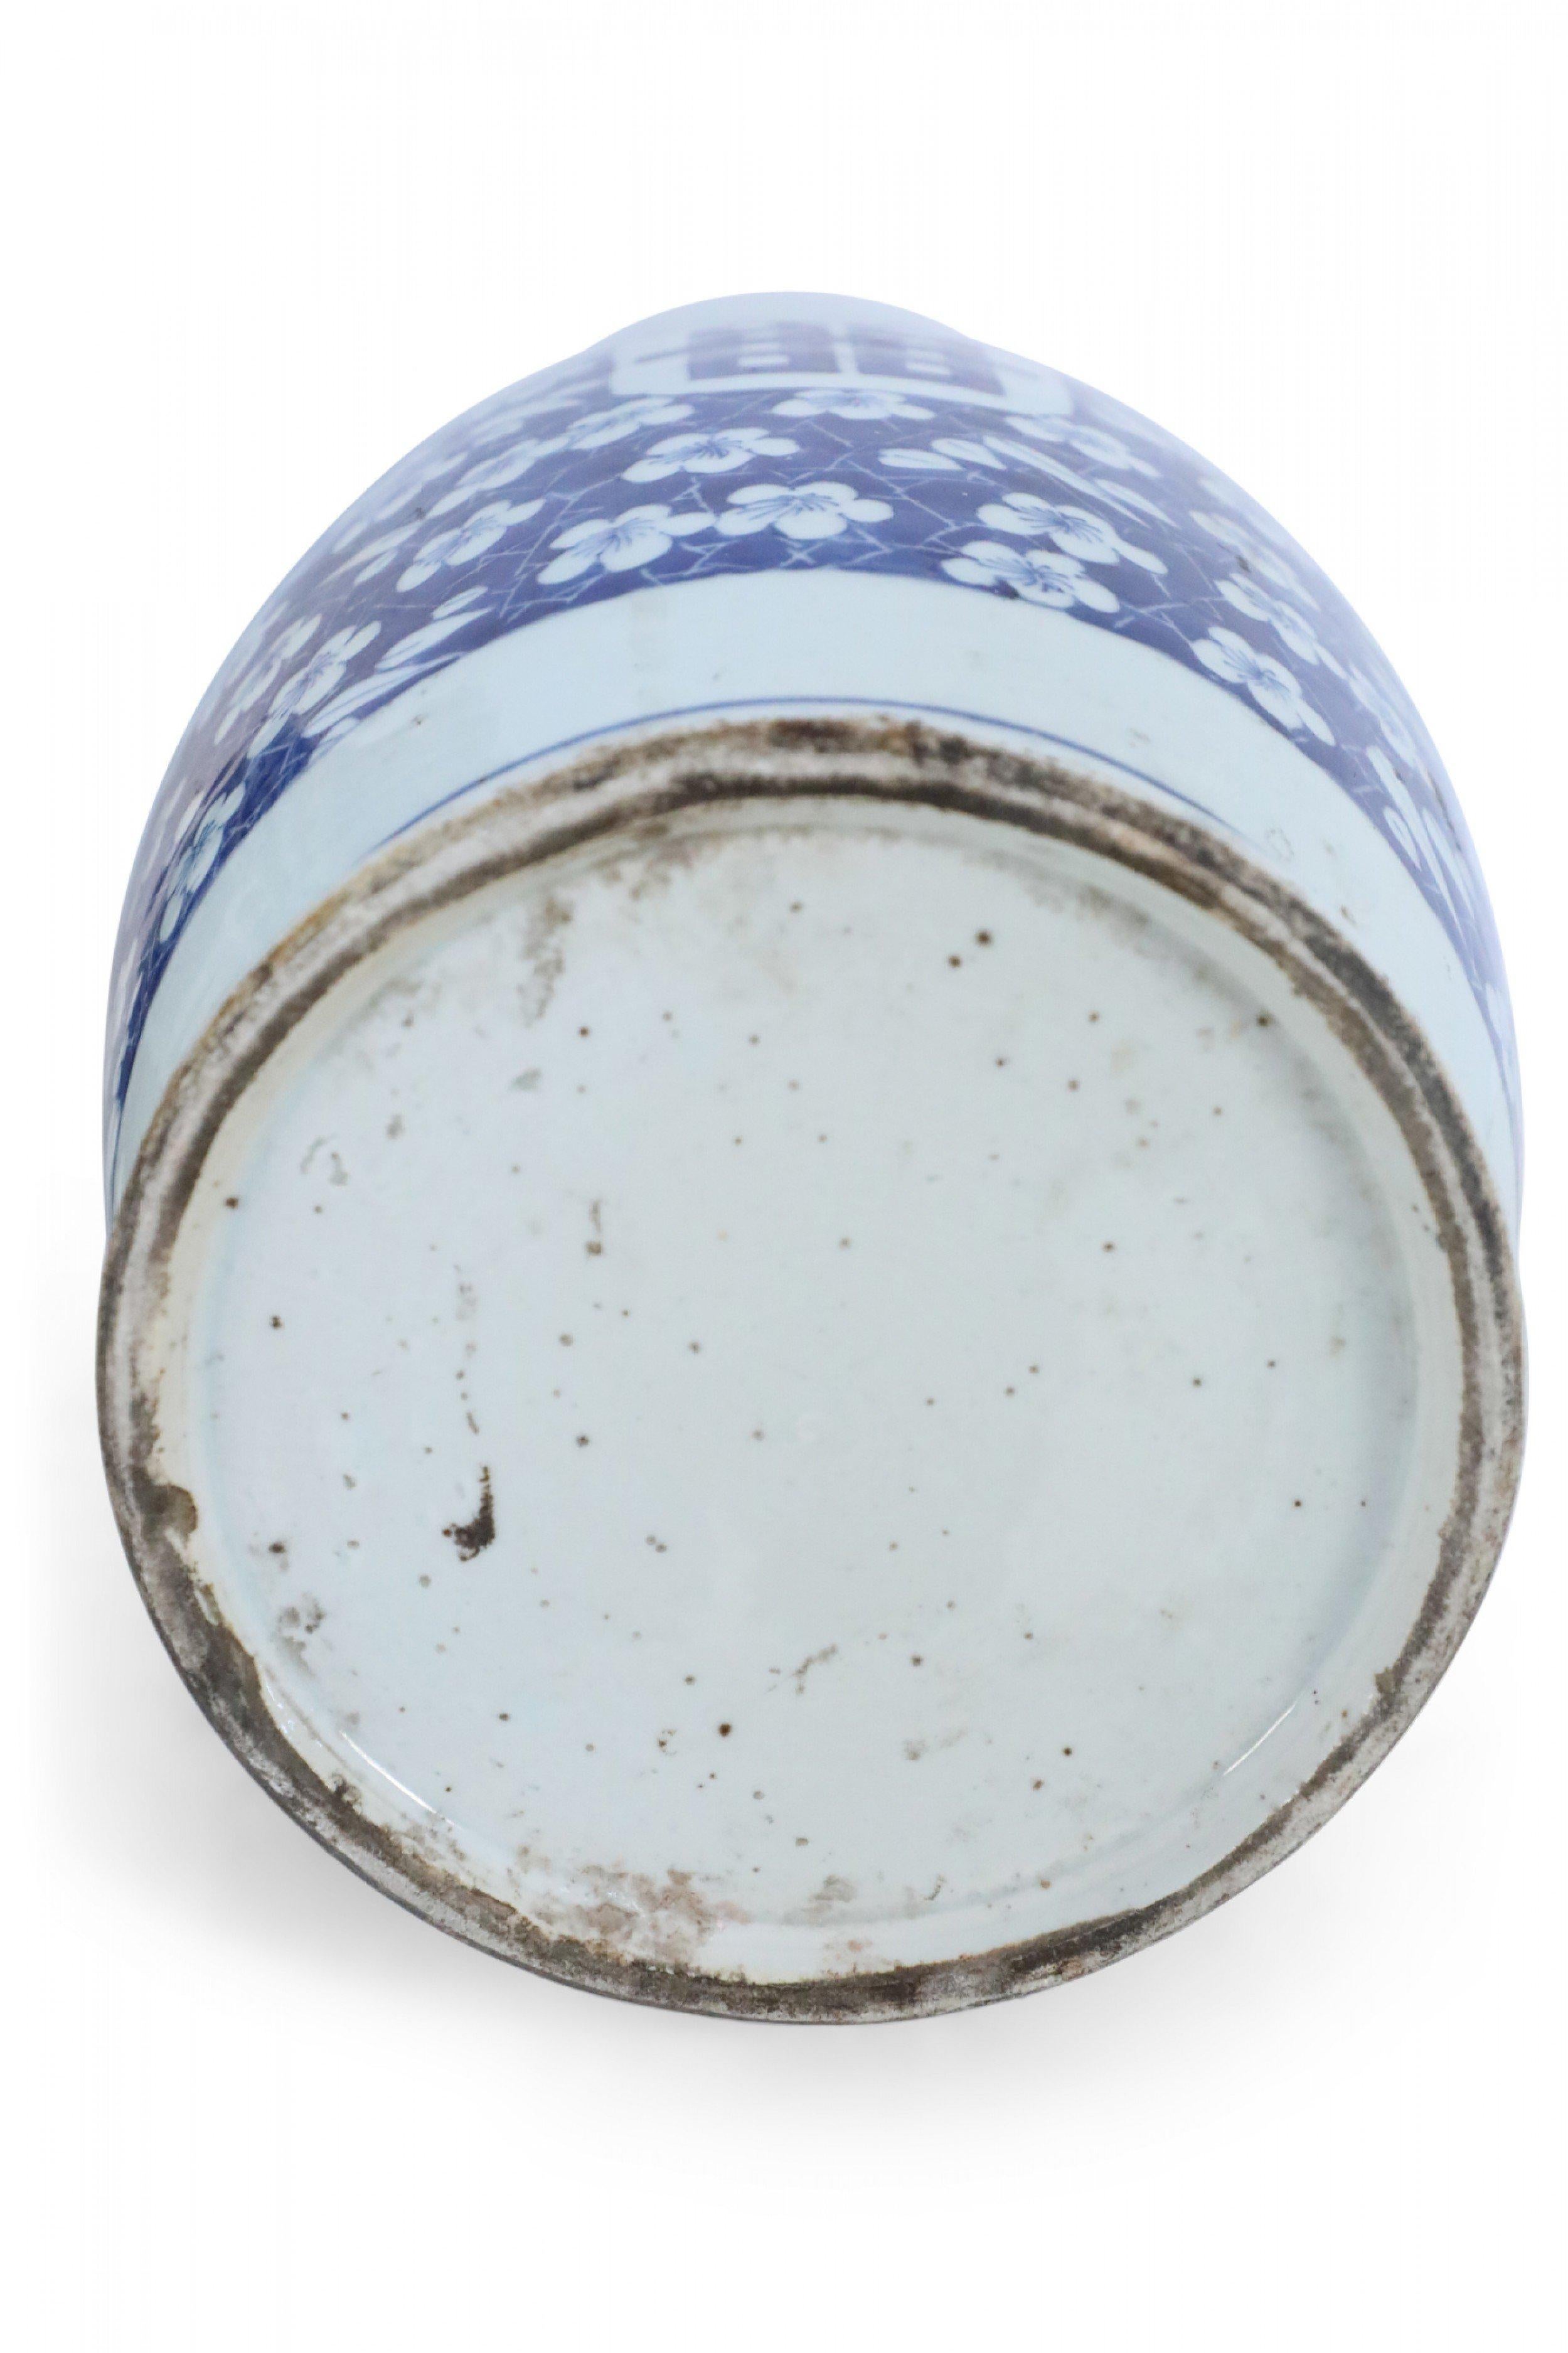 Chinese porcelain urn painted with a blue and white floral background surrounding a center white oval with bold markings, dark blue feathers along the neck, and geometric patterned bands at the top, middle and base.
 